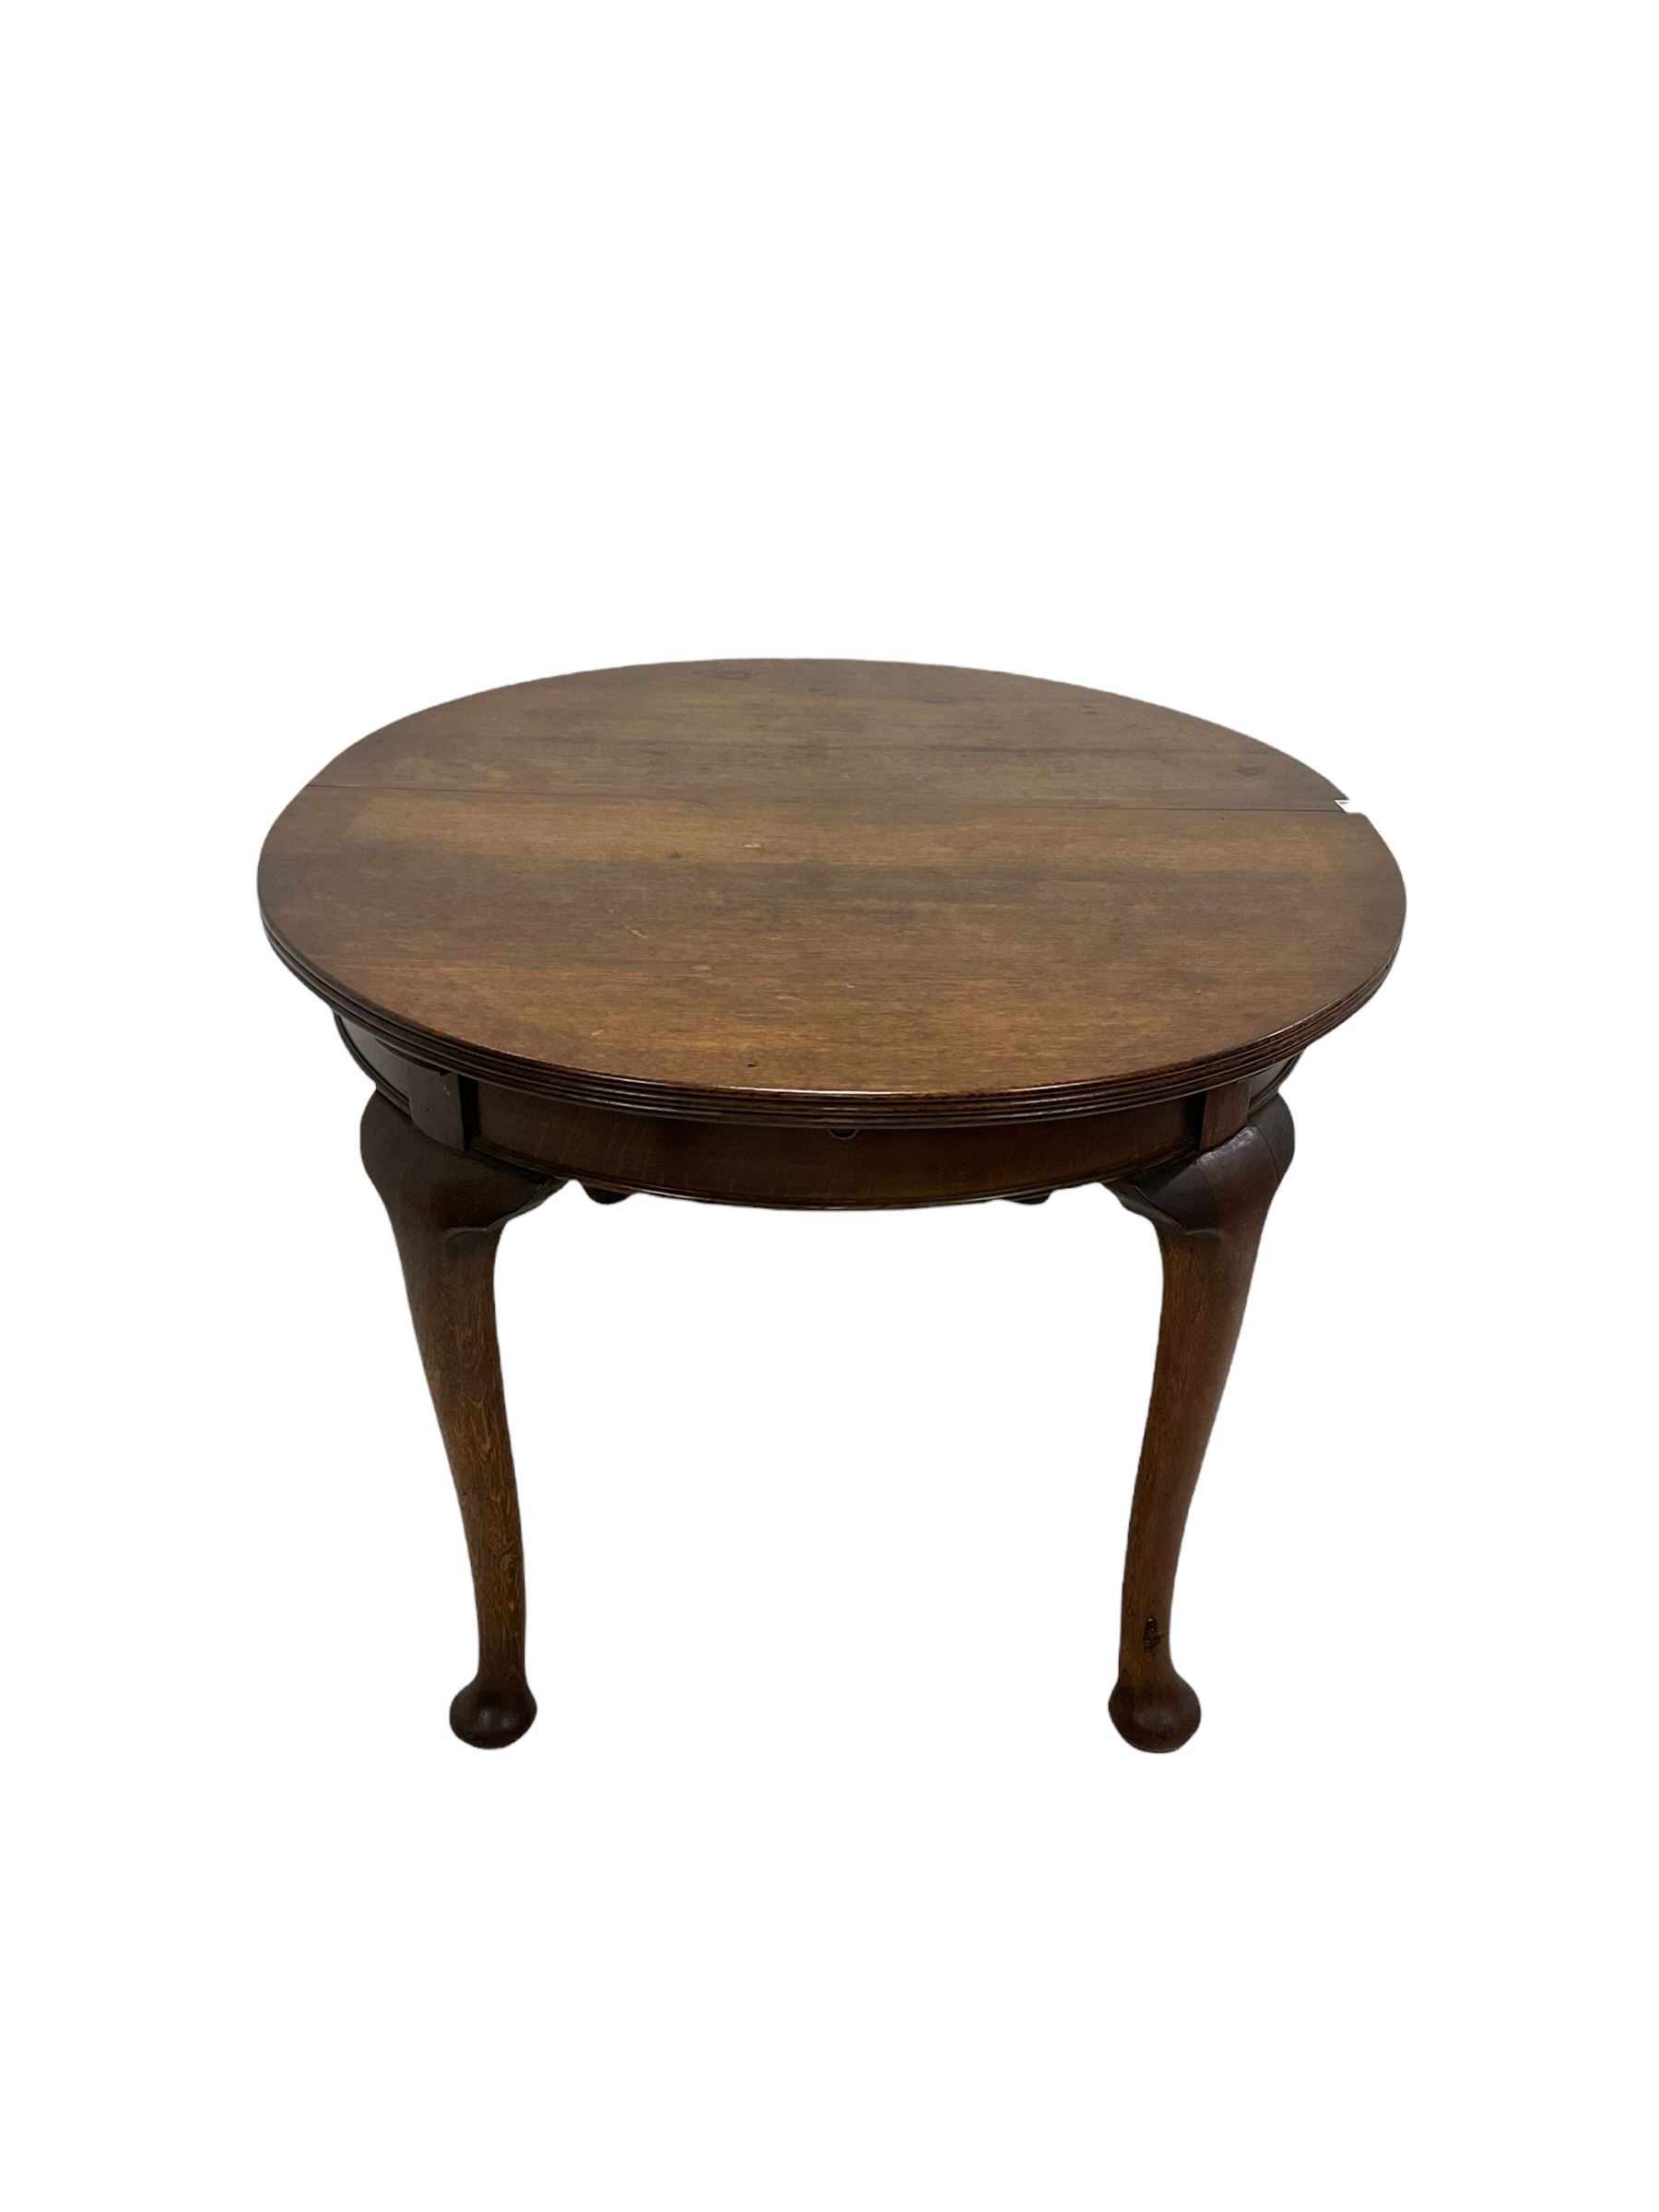 Early 20th century oak extending table - Image 2 of 6